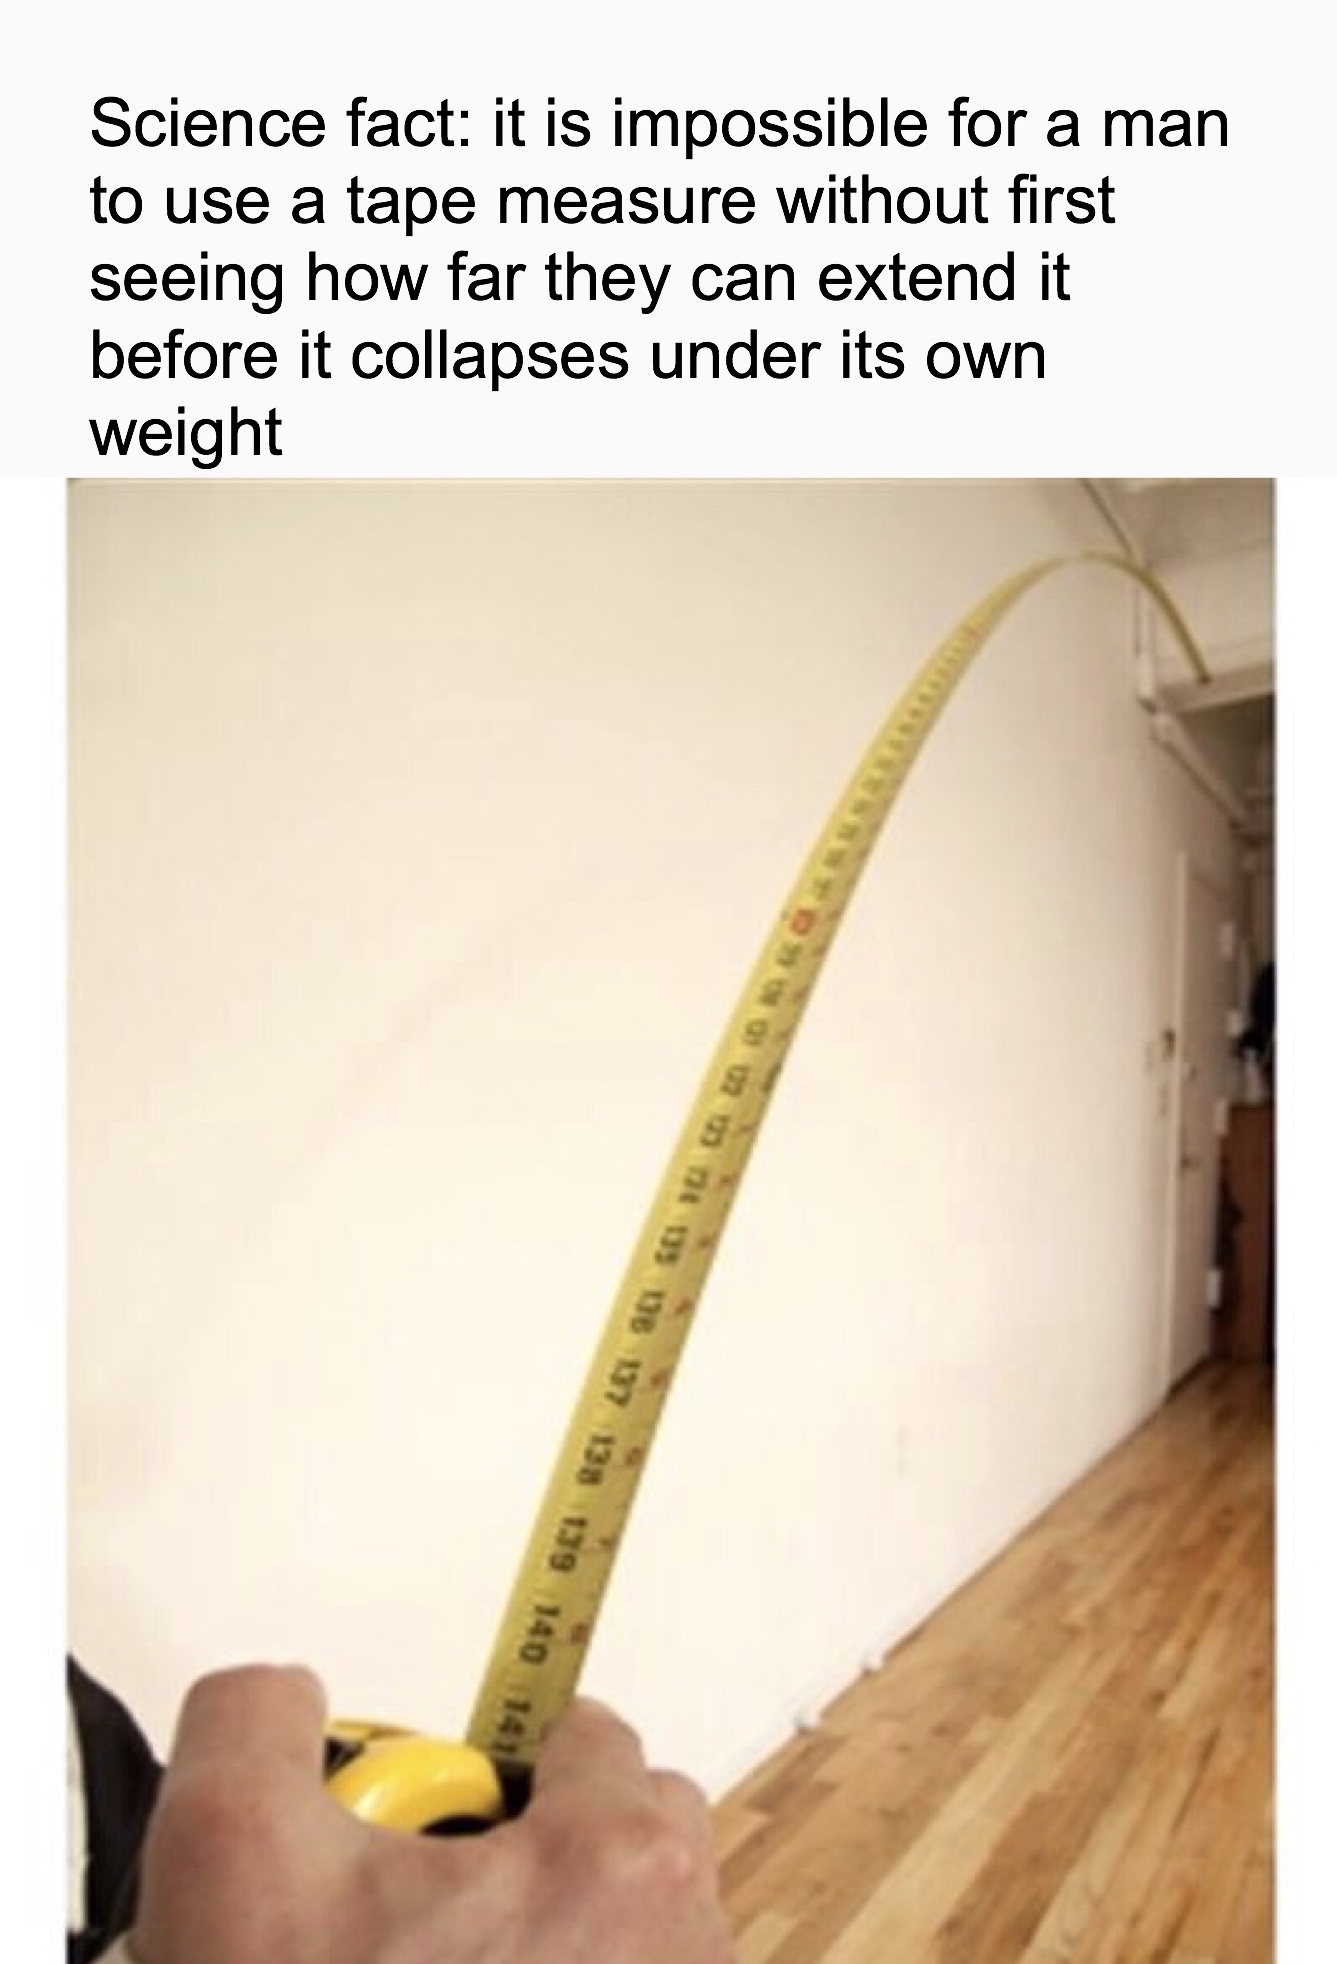 random it's impossible for a man meme - Science fact it is impossible for a man to use a tape measure without first seeing how far they can extend it before it collapses under its own weight m nius 138 137 138 139 140 141